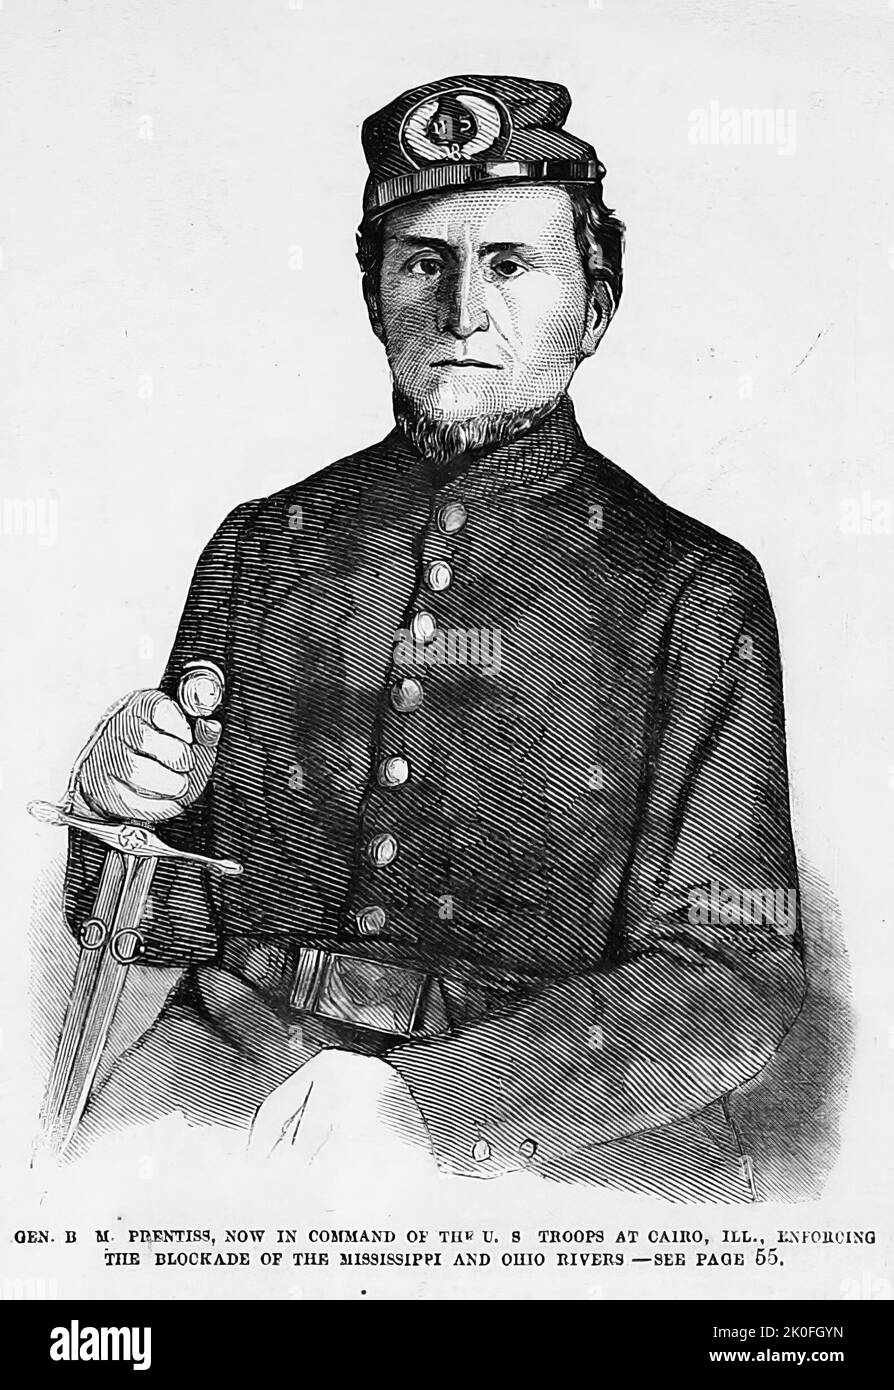 Portrait of General Benjamin Mayberry Prentiss, now in command of the U.S. troops at Cairo, Illinois, enforcing the blockade of the Mississippi and Ohio Rivers (1861). 19th century American Civil War illustration from Frank Leslie's Illustrated Newspaper Stock Photo